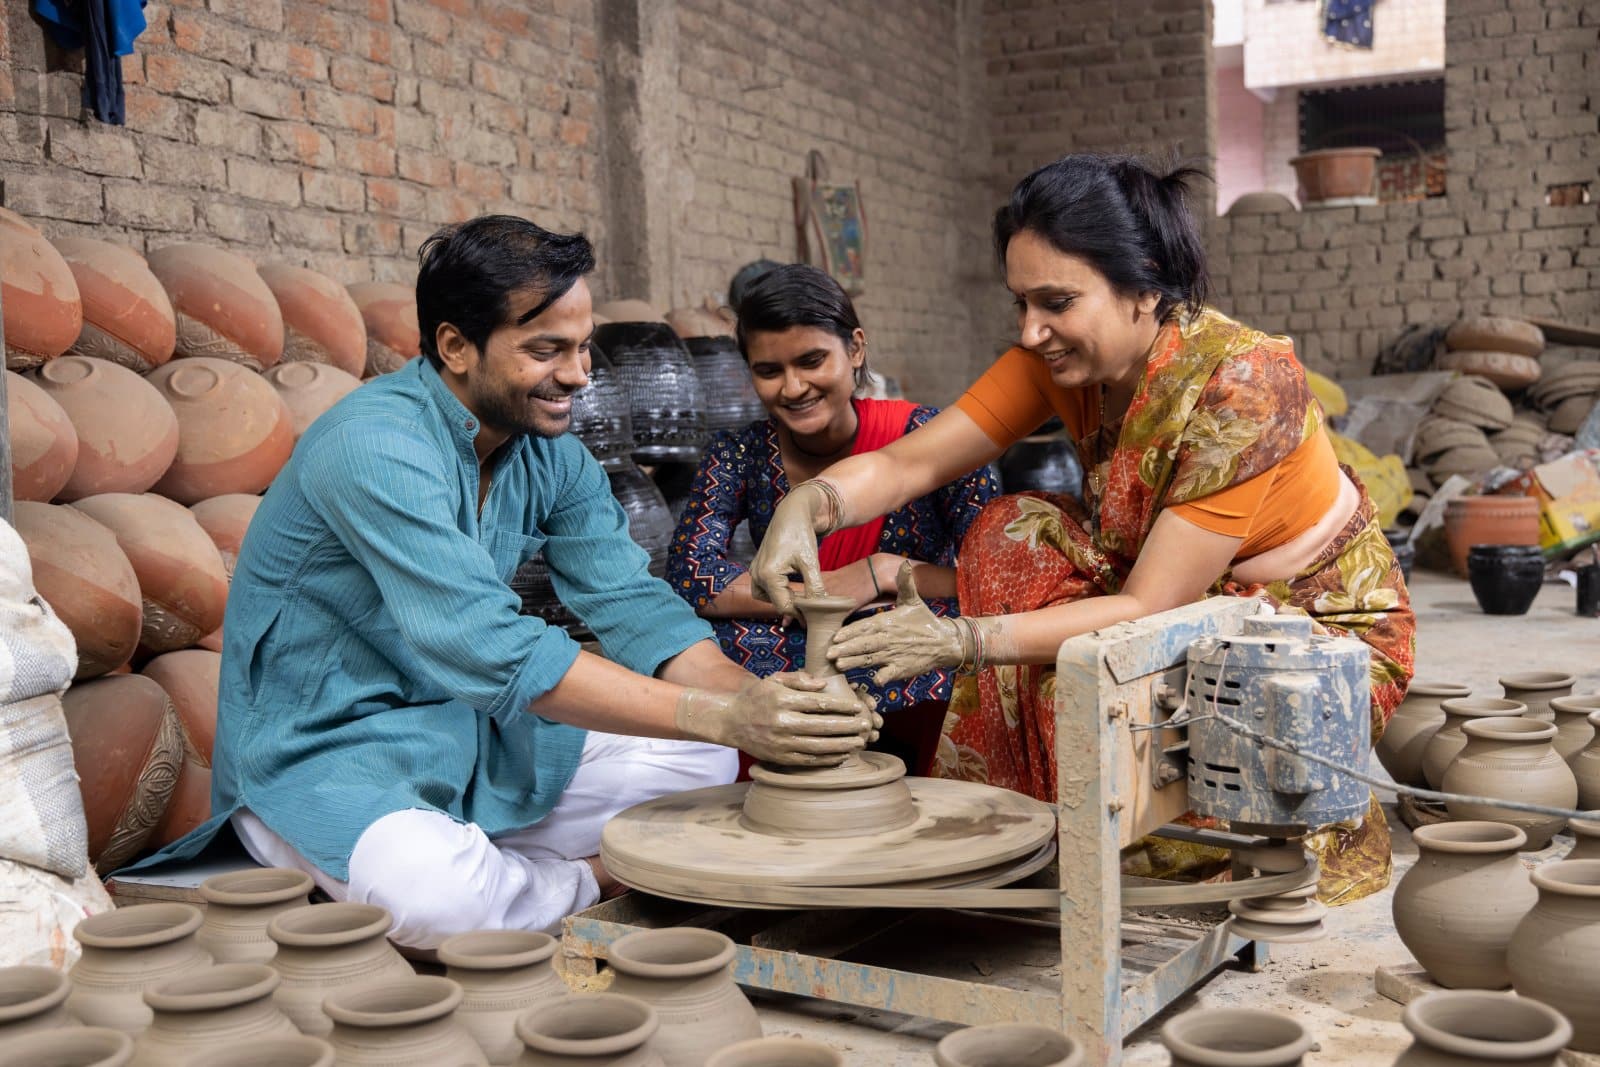 <p class="wp-caption-text">Image Credit: Shutterstock / IndianFaces</p>  <p><span>Participating in art and craft workshops across the Golden Triangle offers an immersive experience into India’s artistic traditions. Delhi’s craft museums and studios offer workshops in pottery and textile arts. Agra is renowned for its marble inlay work, with workshops allowing visitors to try their hand at this intricate craft. Jaipur’s tie-dye and block printing workshops provide insight into traditional Rajasthani textile designs, offering a hands-on experience in creating your own fabric designs.</span></p>